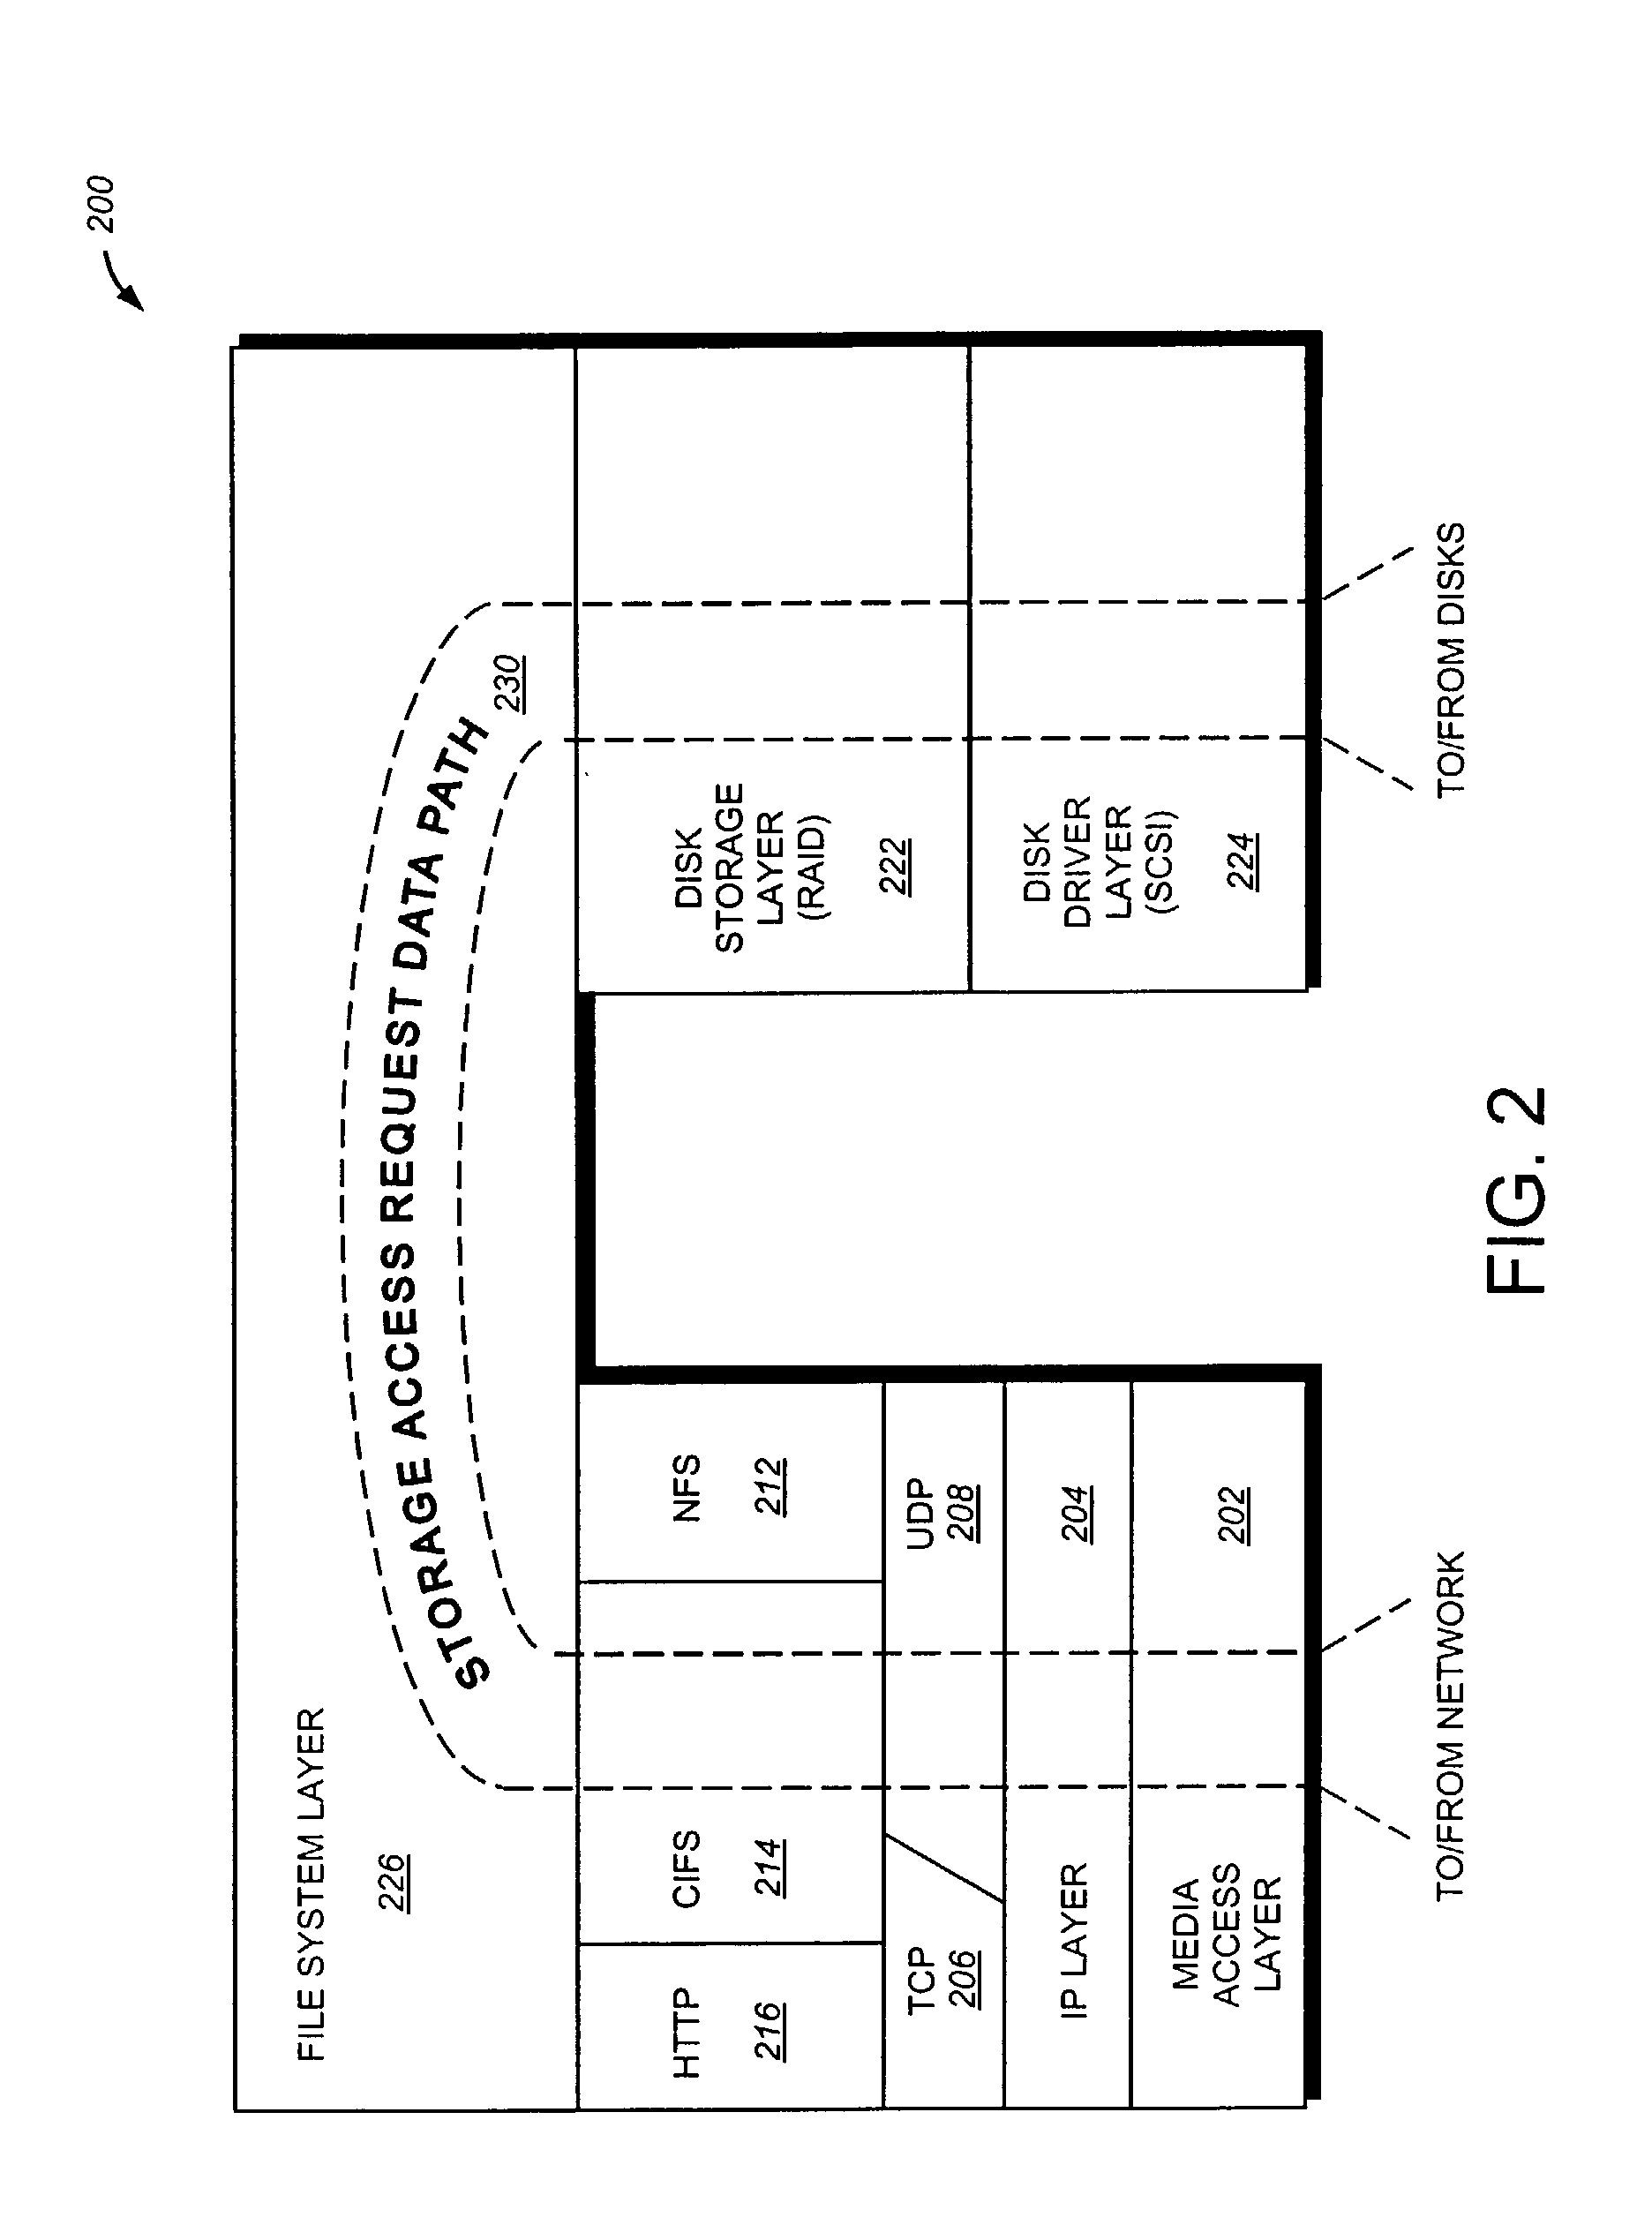 System and method for mapping block-based file operations to file level protocols